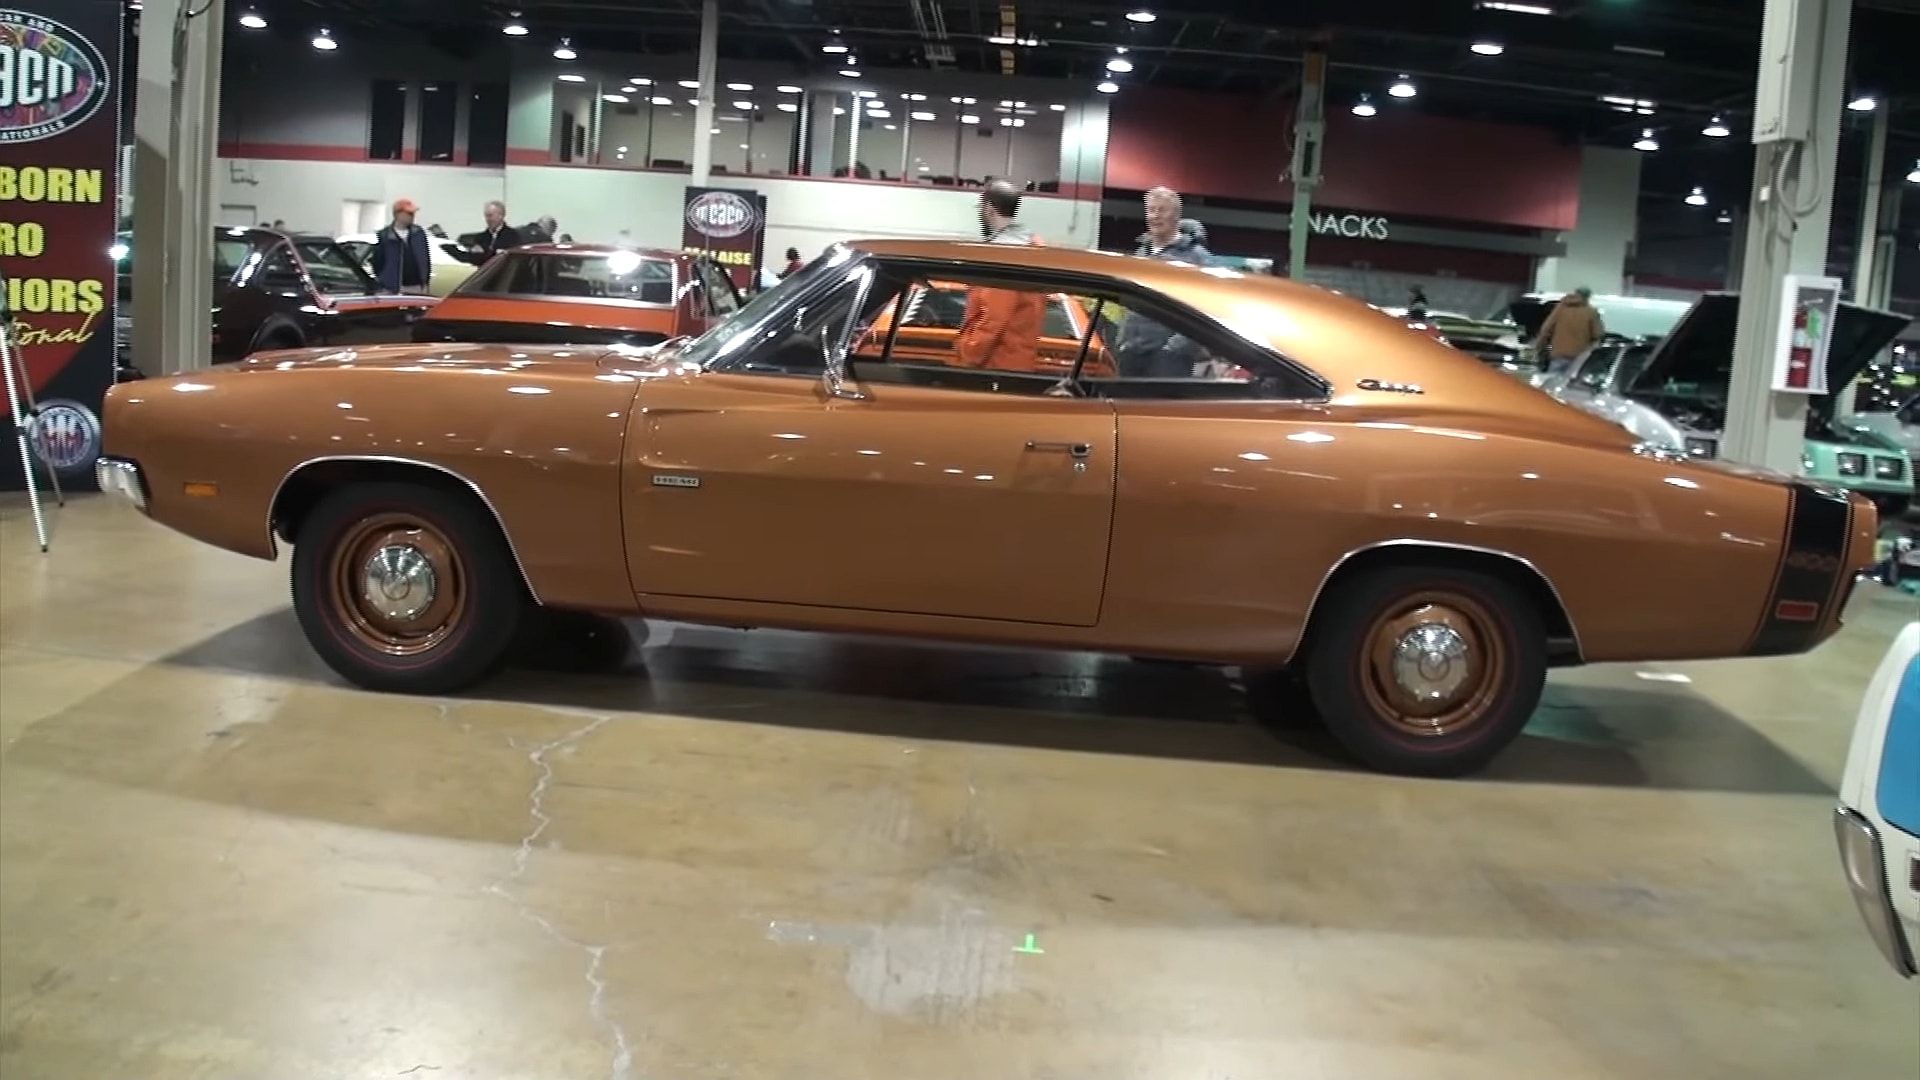 This 1969 Dodge Charger 500 HEMI in Copper Bronze Is Rarer Than Hen's Teeth  - autoevolution